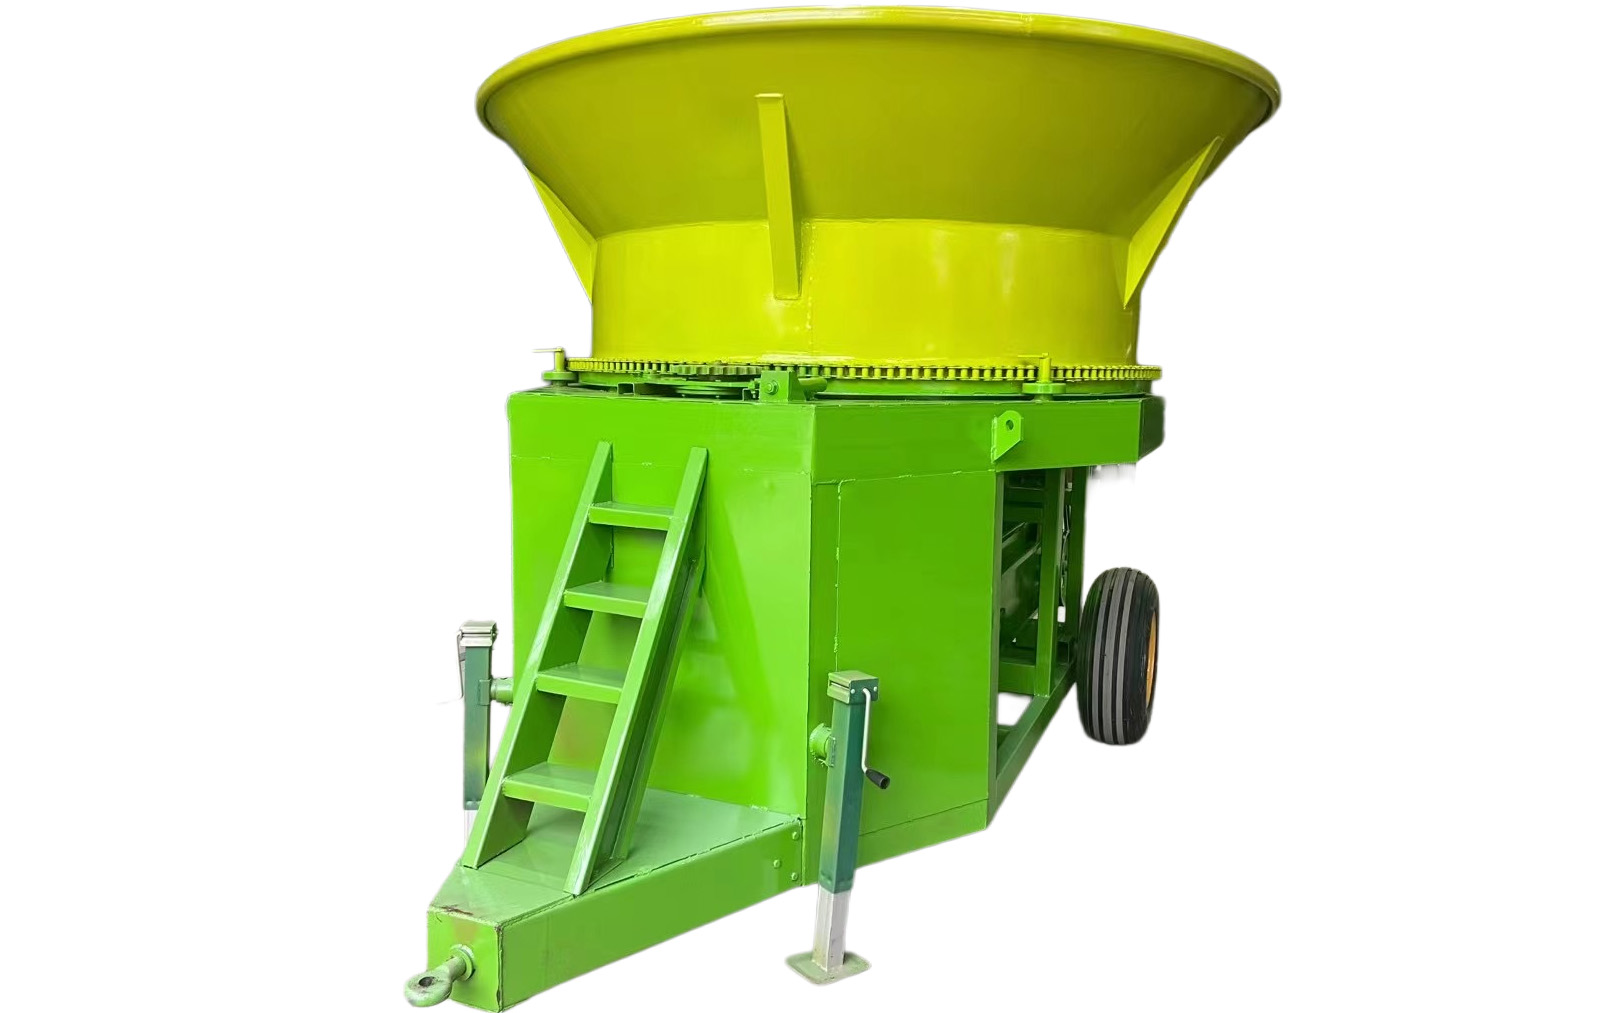 Straw bale crusher helps you easily create high-quality feed  Improve agricultural waste treatment efficiency